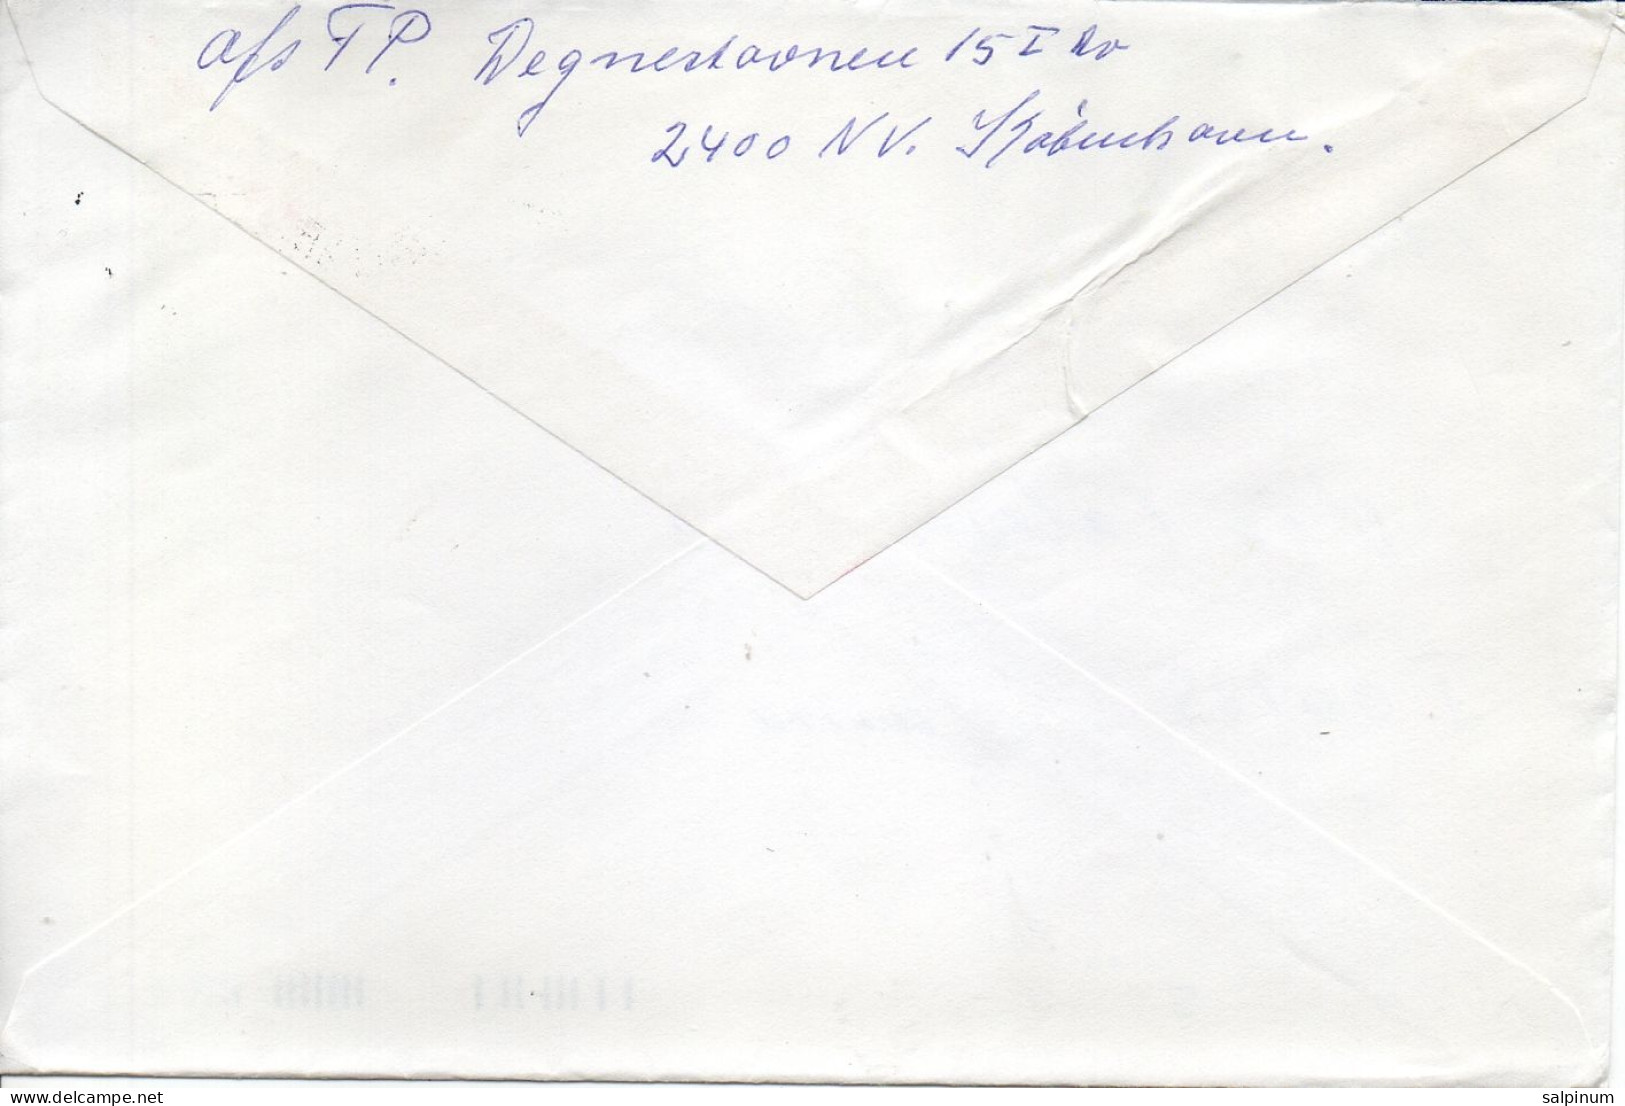 Philatelic Envelope With Stamps Sent From DENMARK To ITALY - Storia Postale